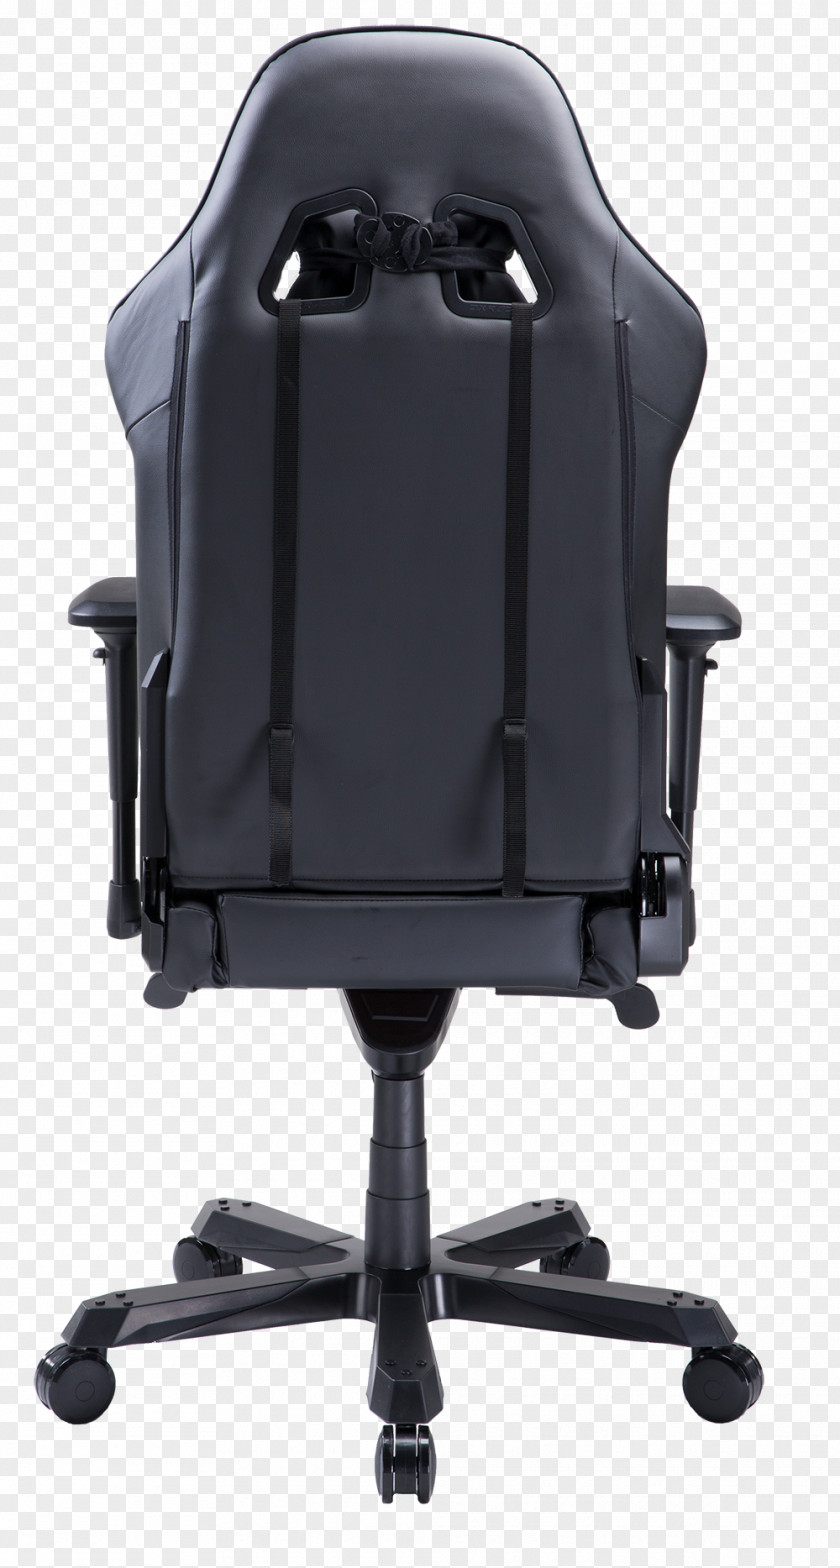 Chair Office & Desk Chairs Mesh Swivel PNG